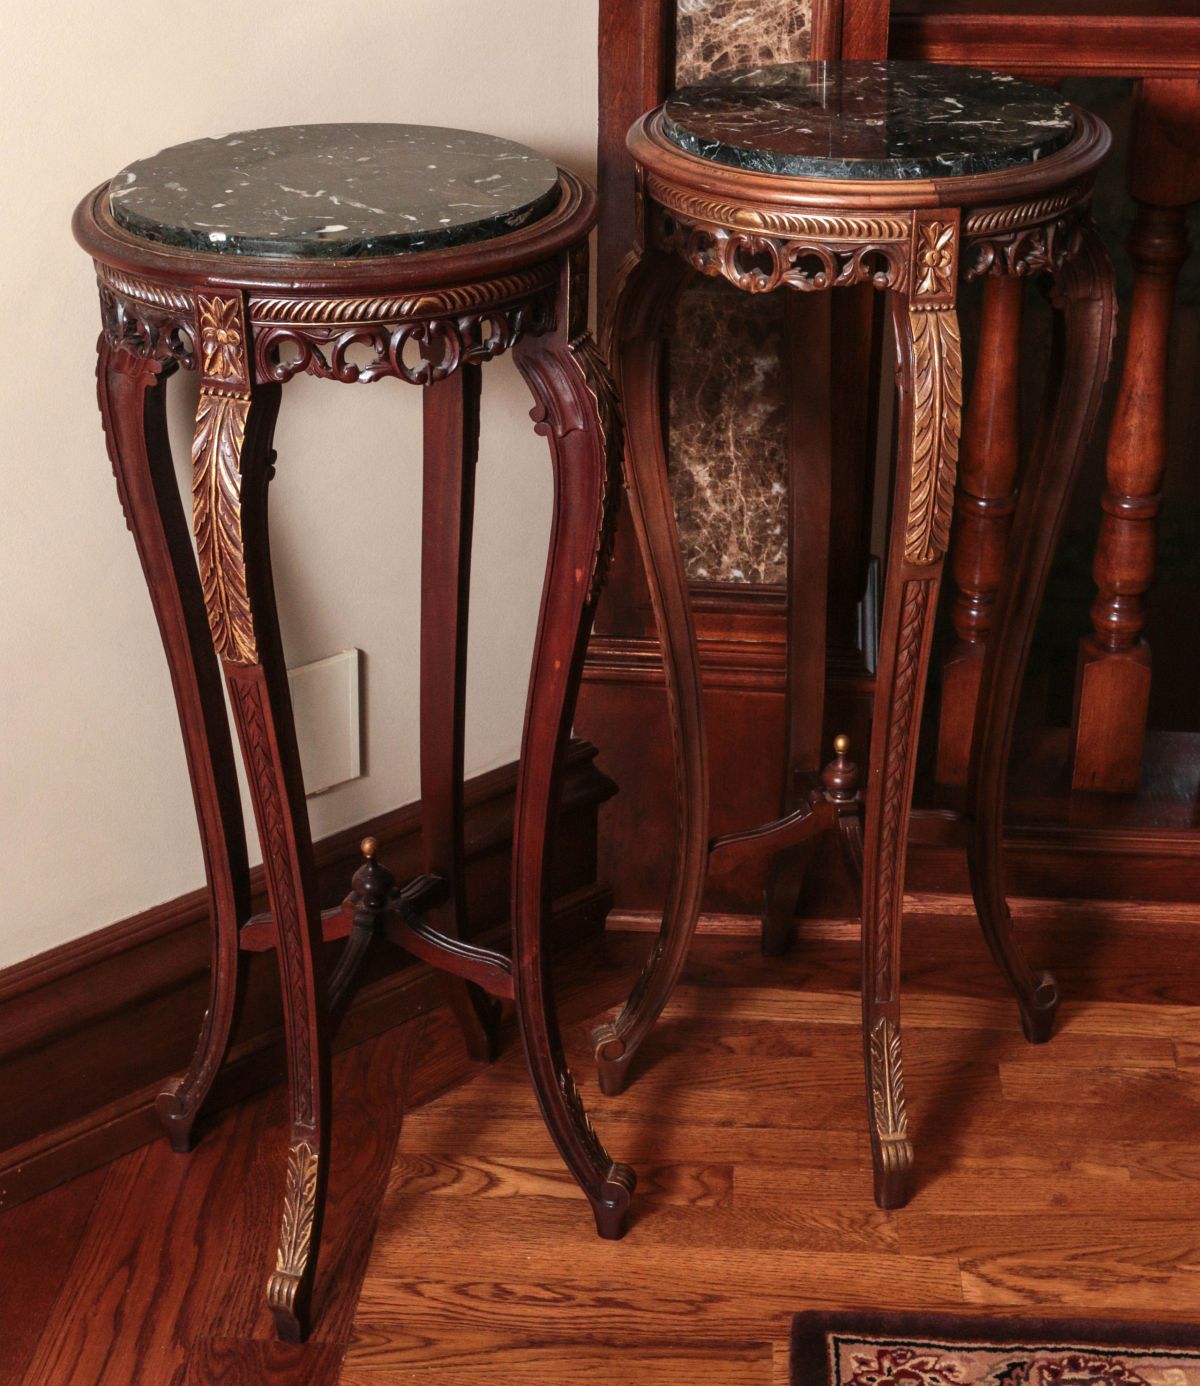 TWO TALL FRENCH STYLE STANDS WITH MARBLE TOPS